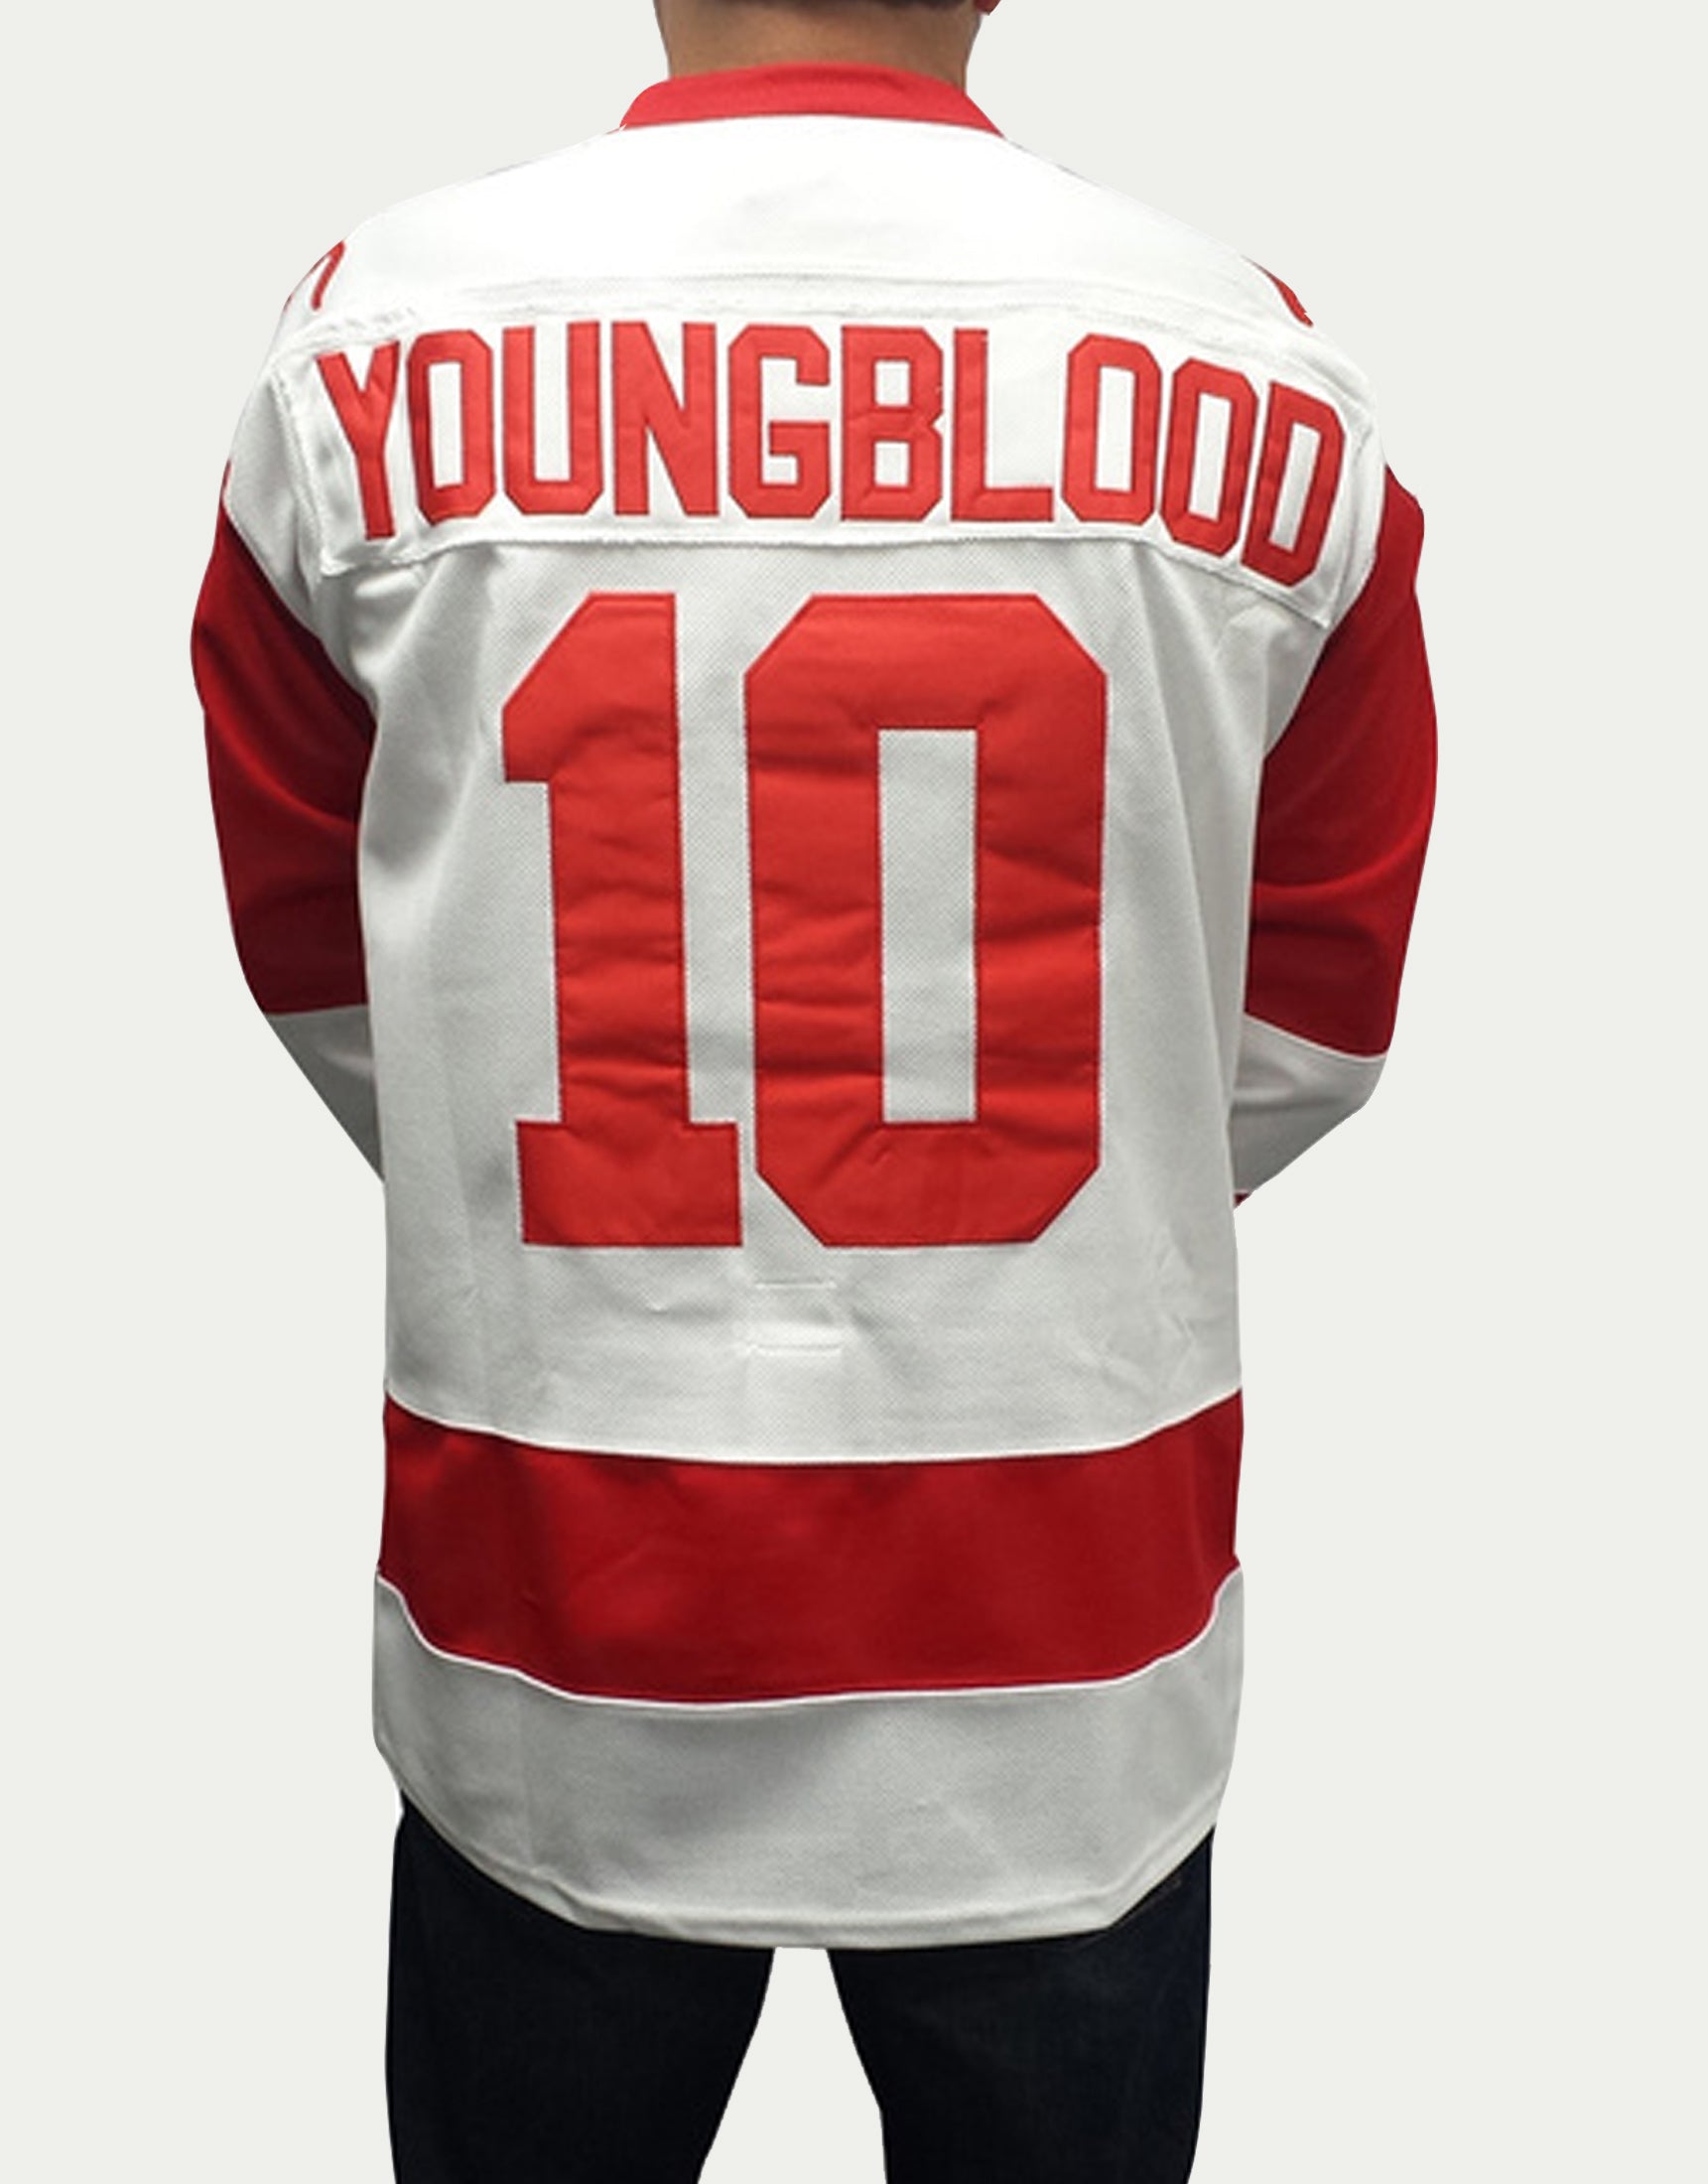 dean youngblood jersey